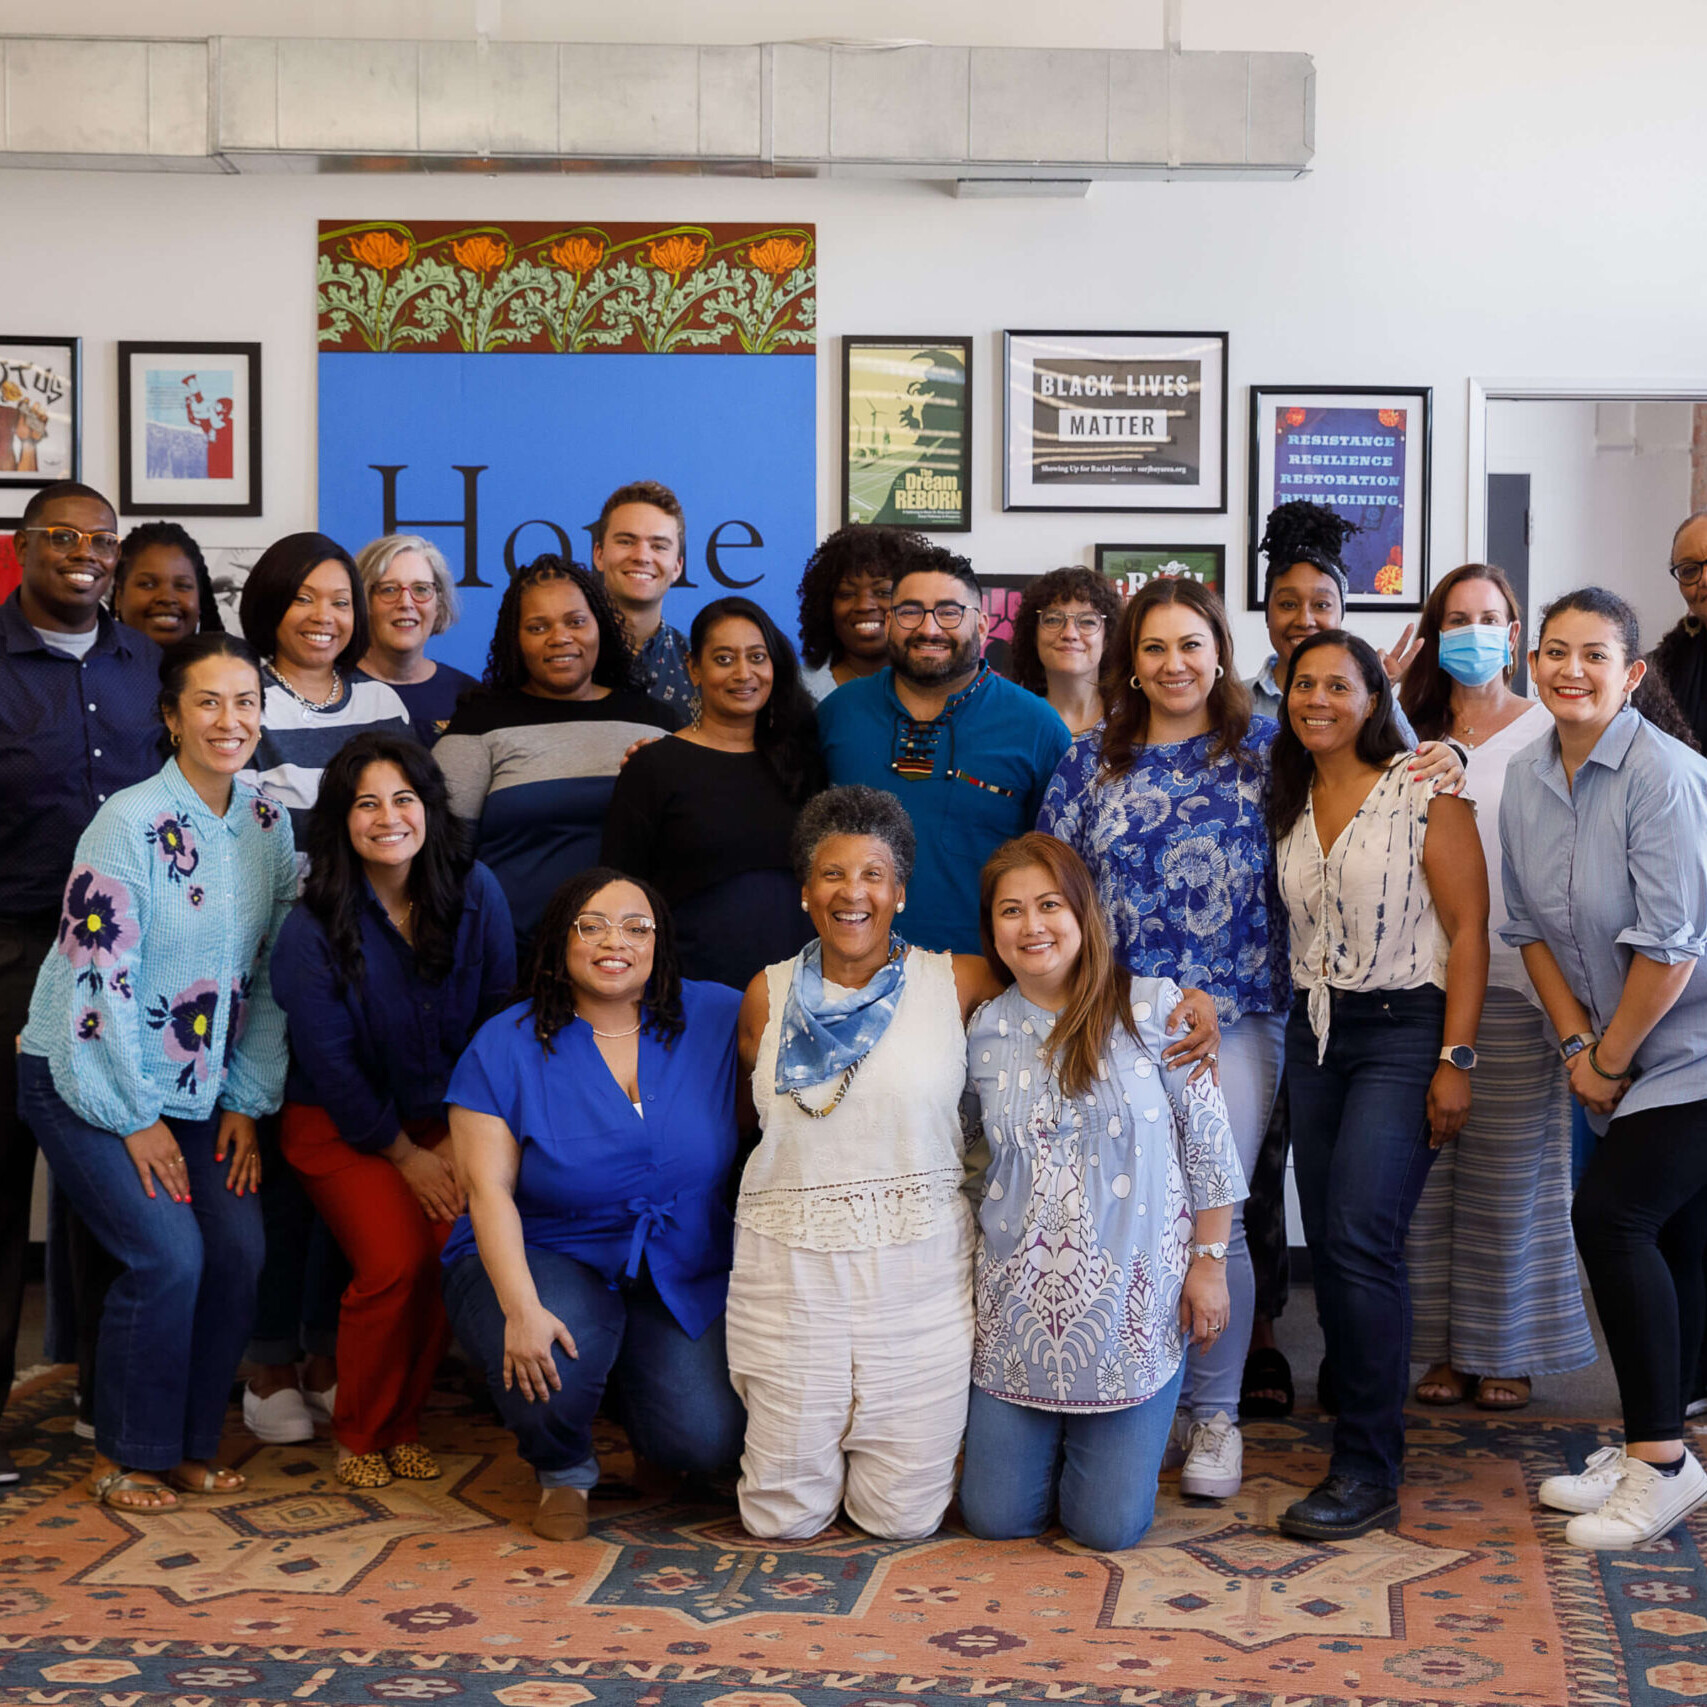 Twenty three people wearing blue shirts smile for a group photo in three separate rows. A wall full of framed posters and activist art is behind them.